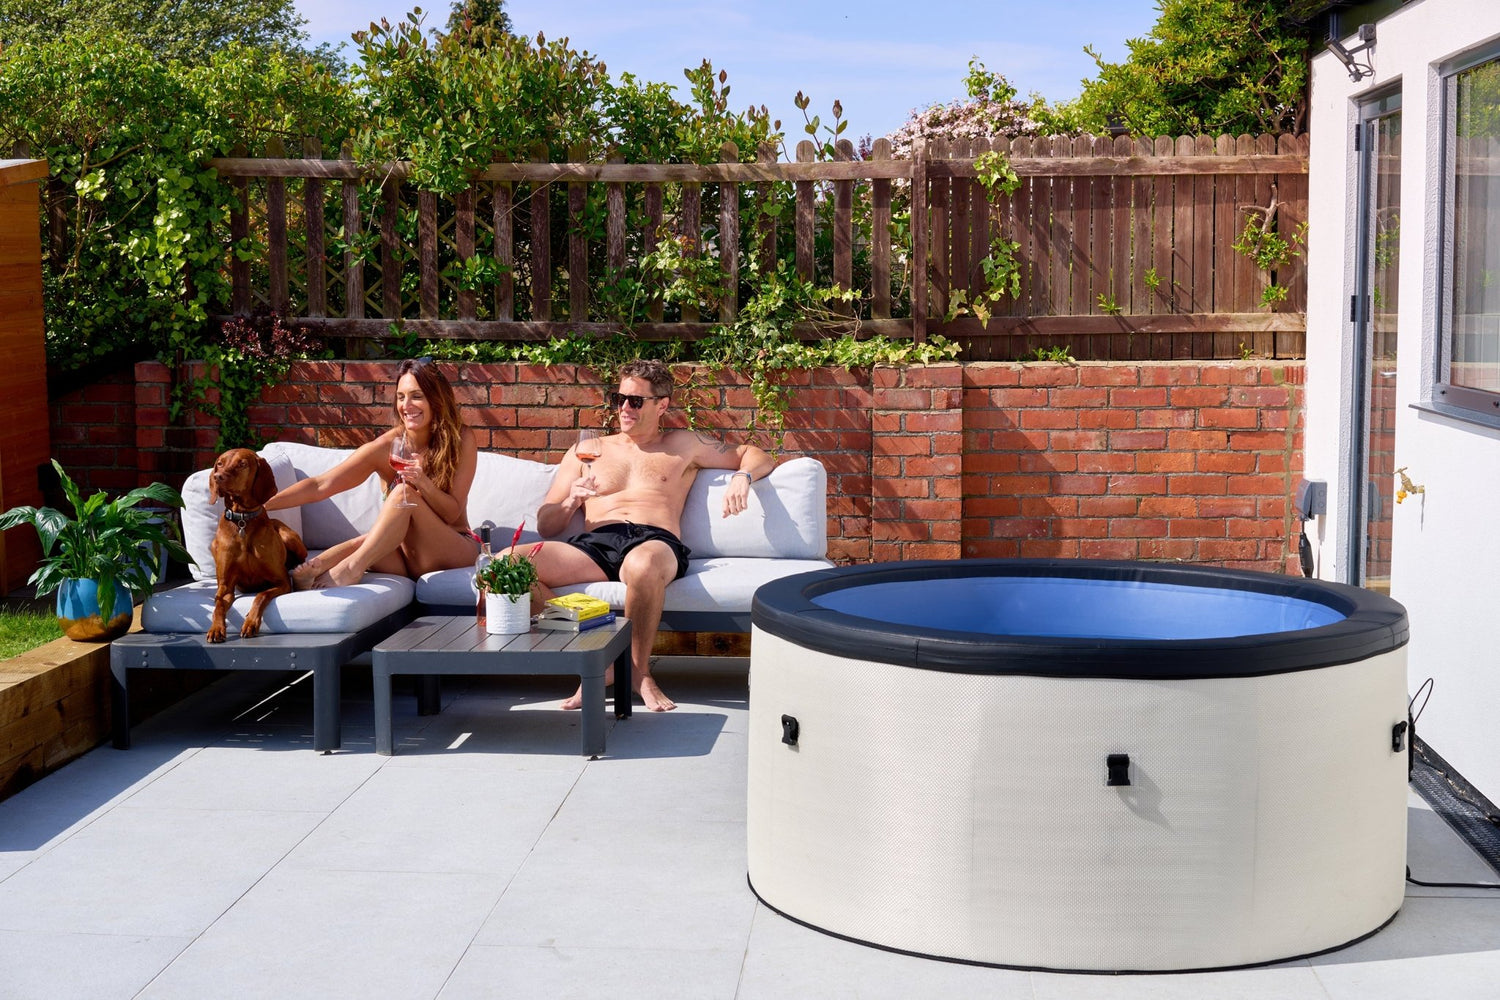 Beat the Heat: How Hot Tubs Can Help You Stay Cool and Refreshed During Summer - Wave Spas USA